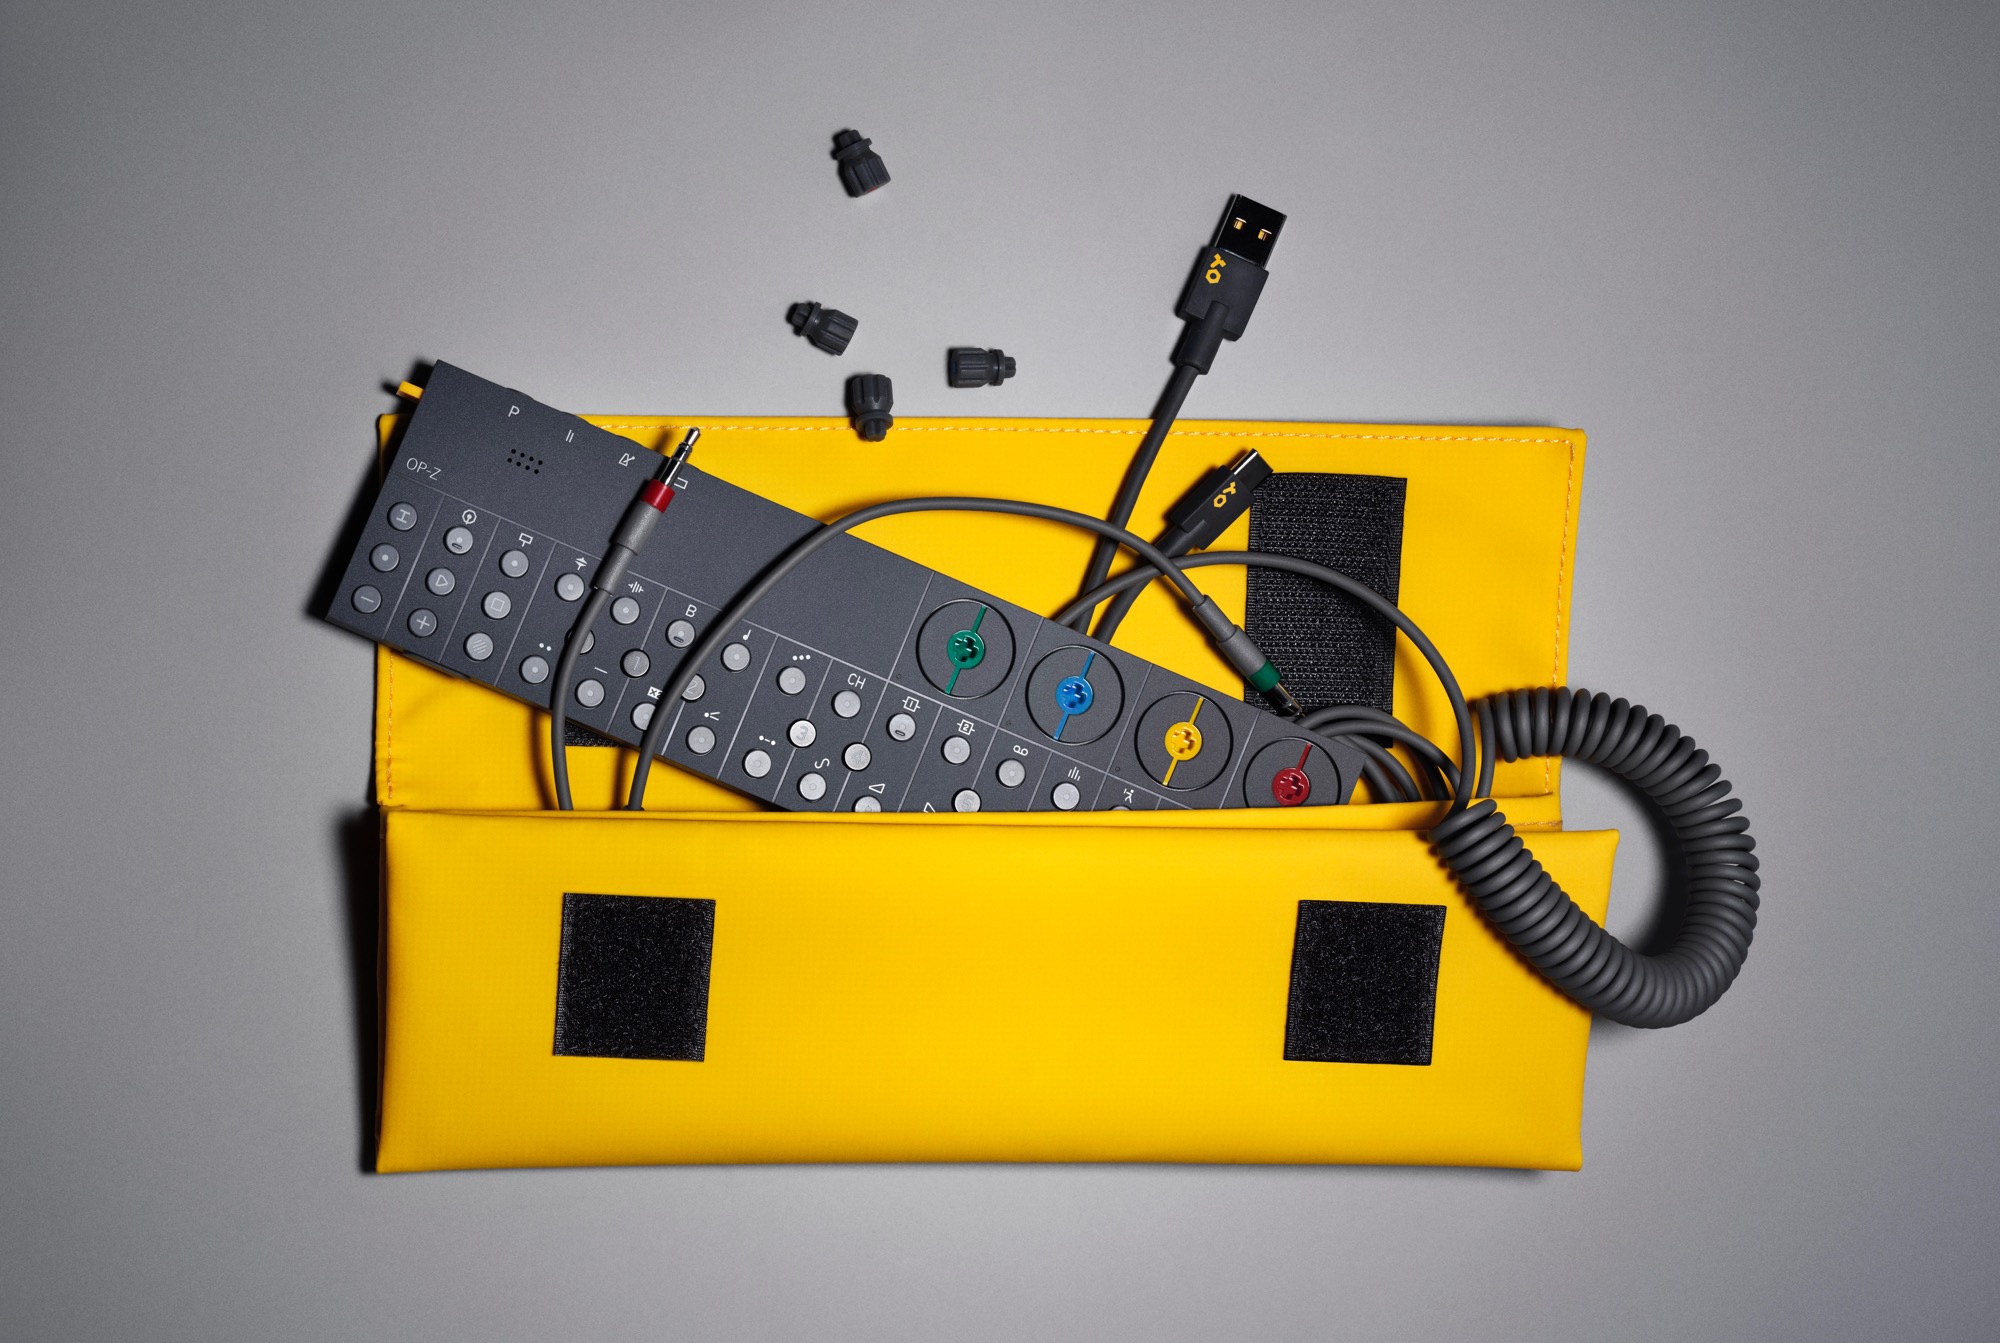 The Teenage Engineering OP-Z is tiny, yet more powerful than you can possibly imagine.